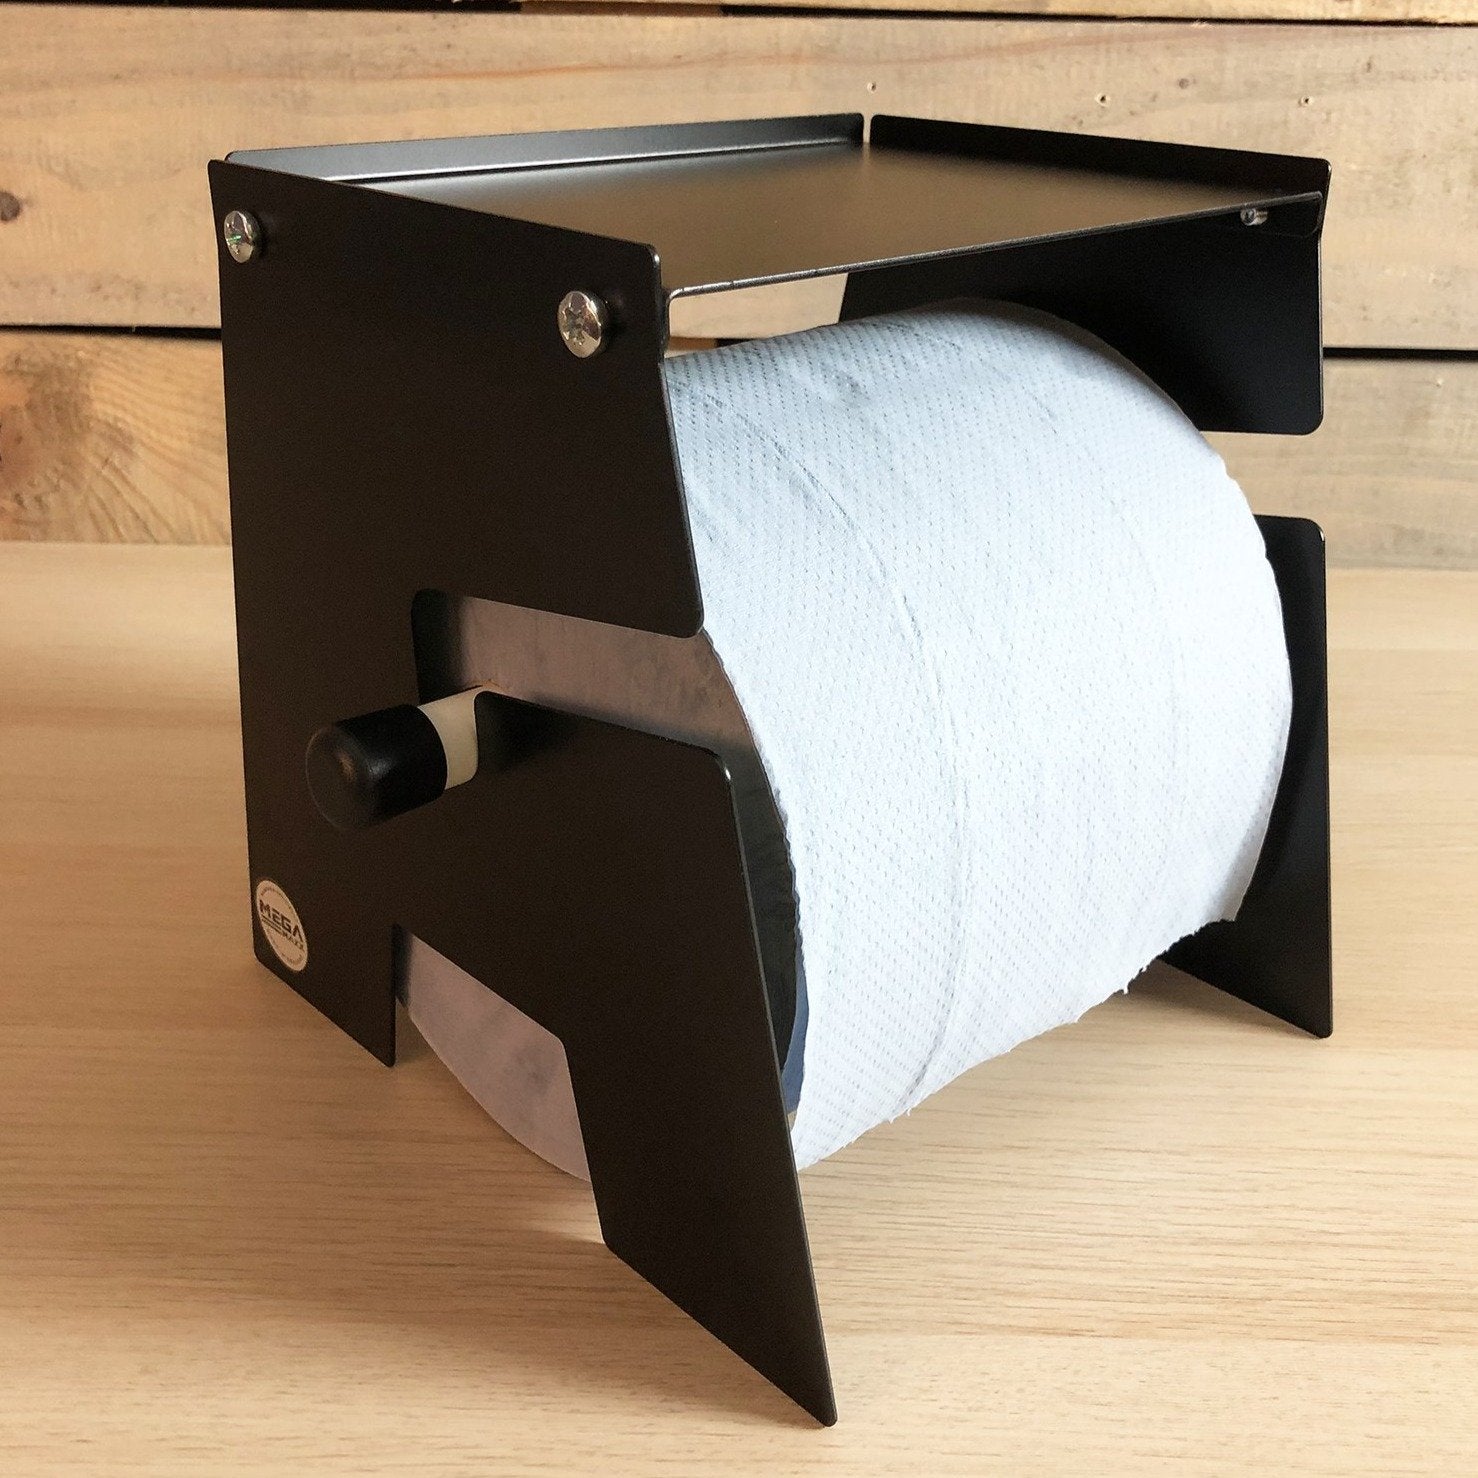 MegaMaxx UK™ Free-Standing Blue Roll & Paper Towel Holder with Shelf - Indoor Outdoors